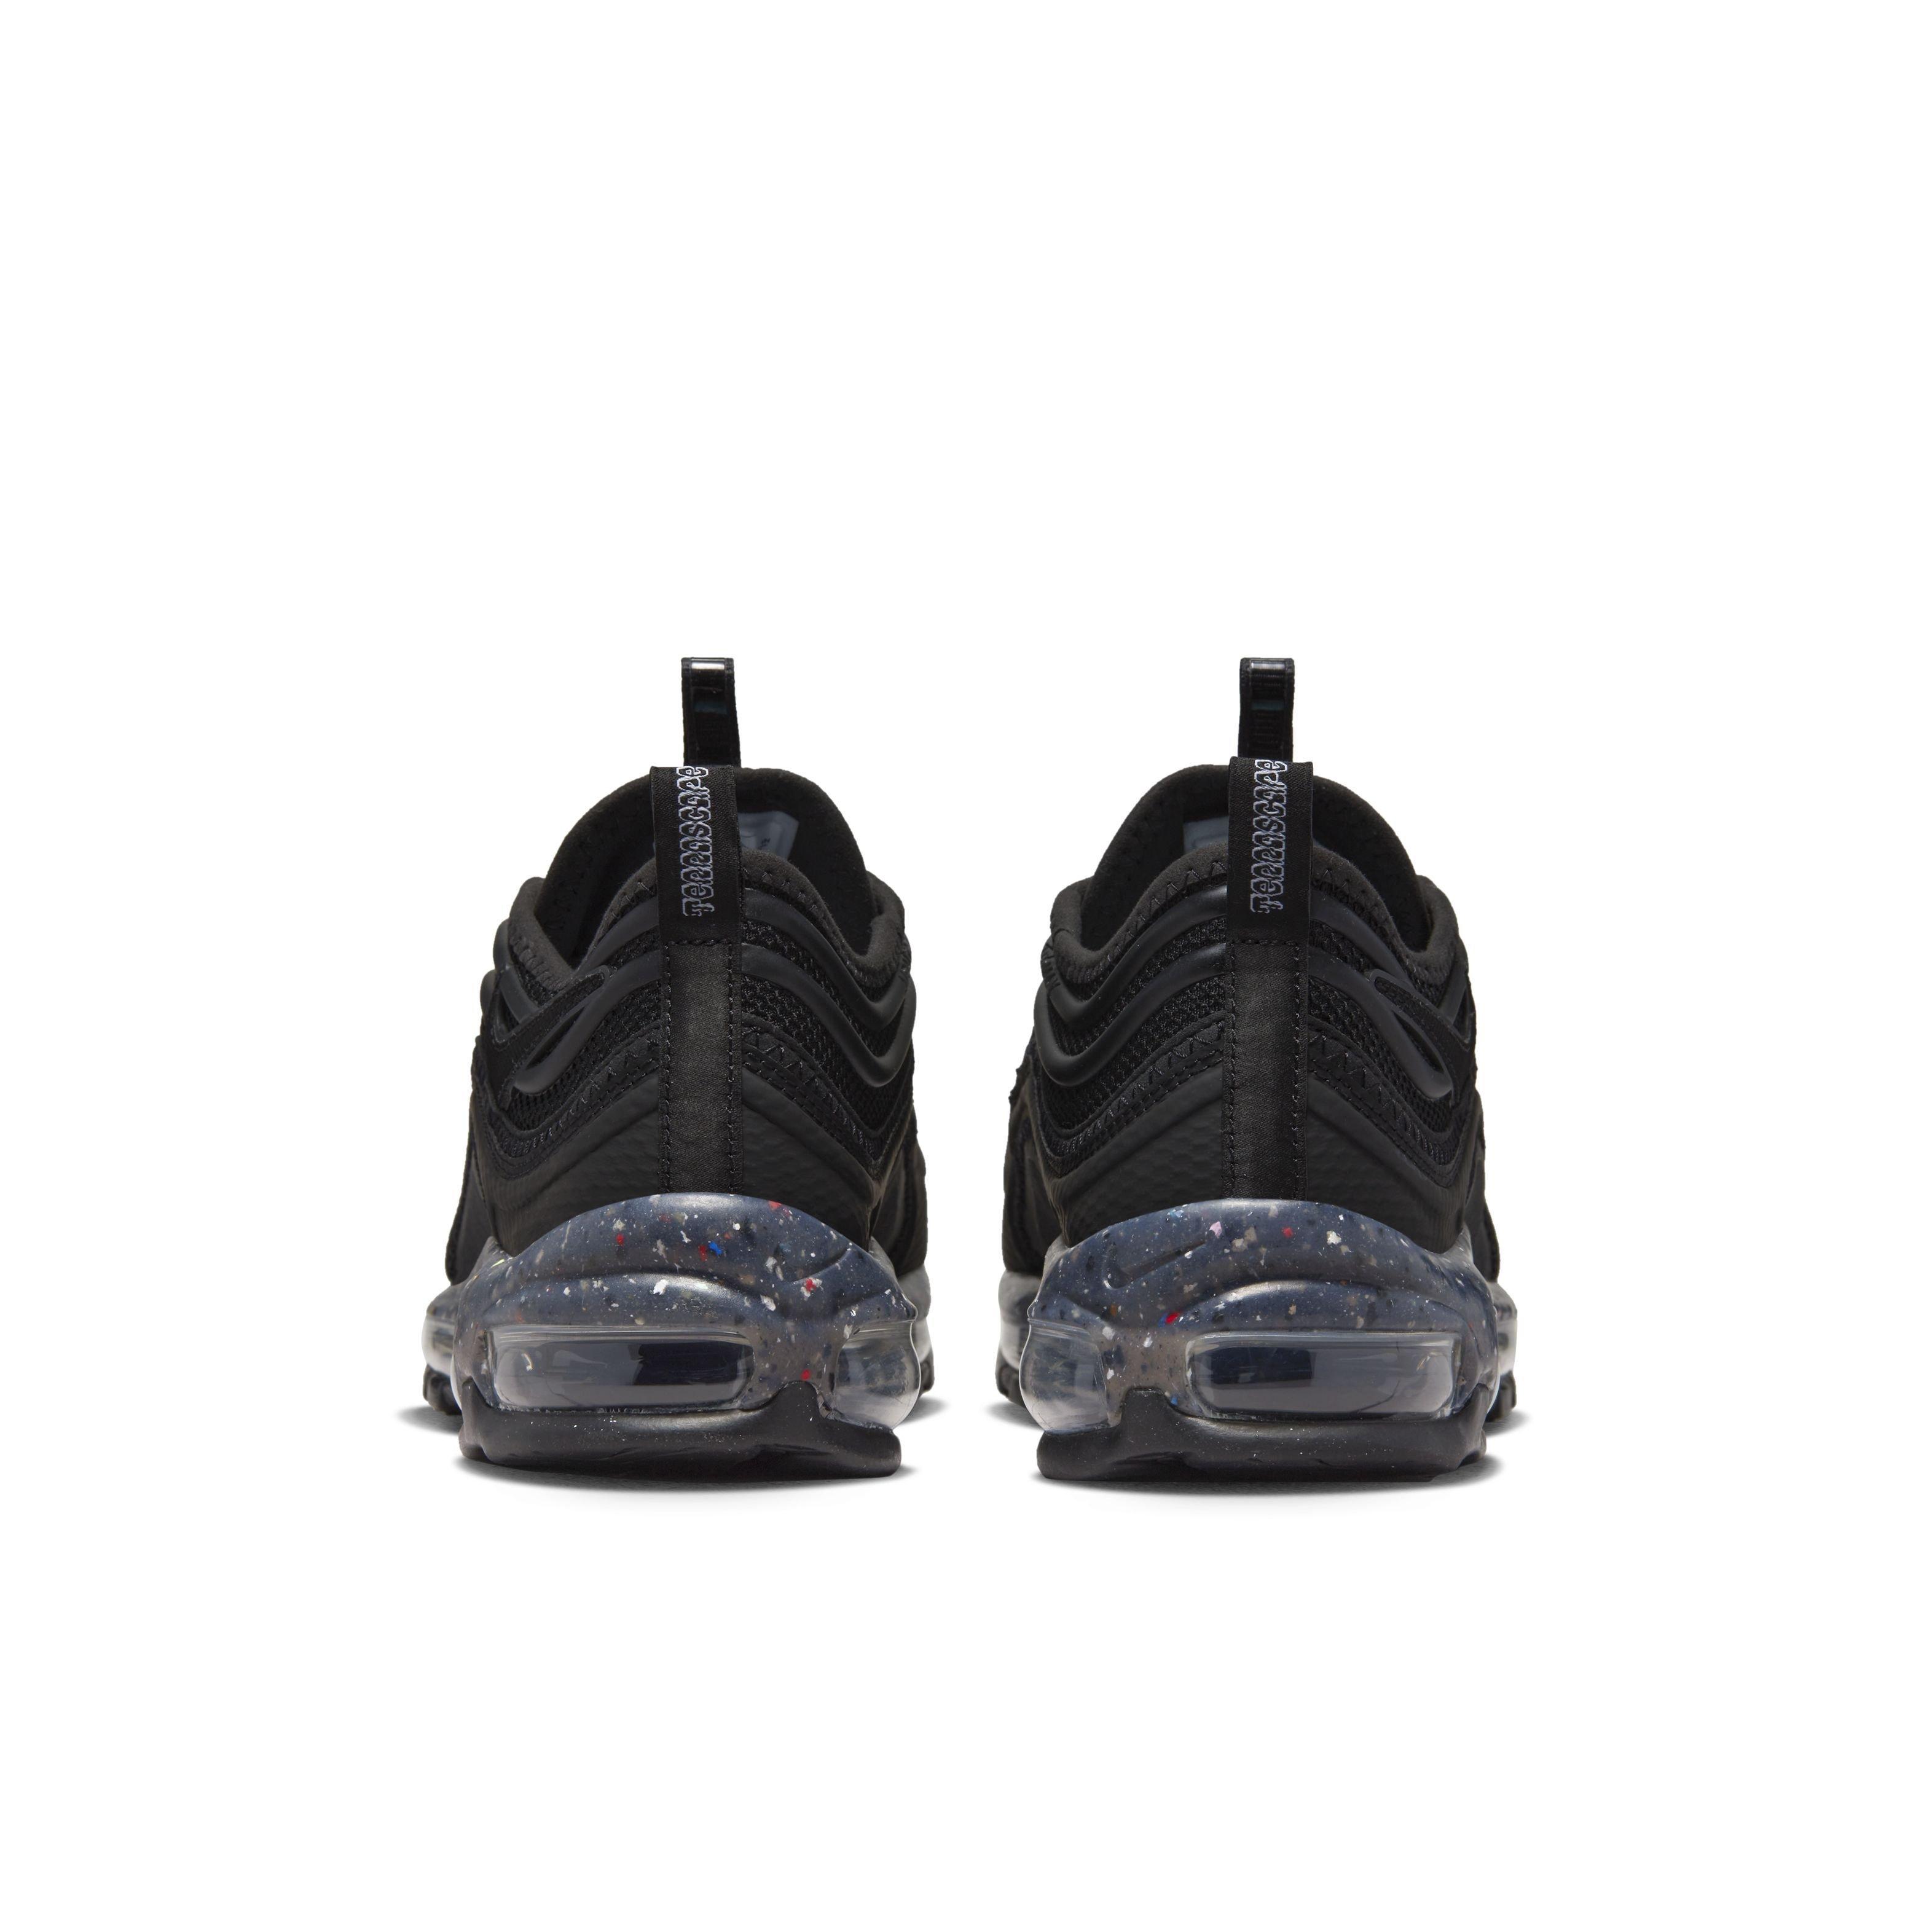 Nike Air Max 97 Terrascape Next trainers in black and brights mix